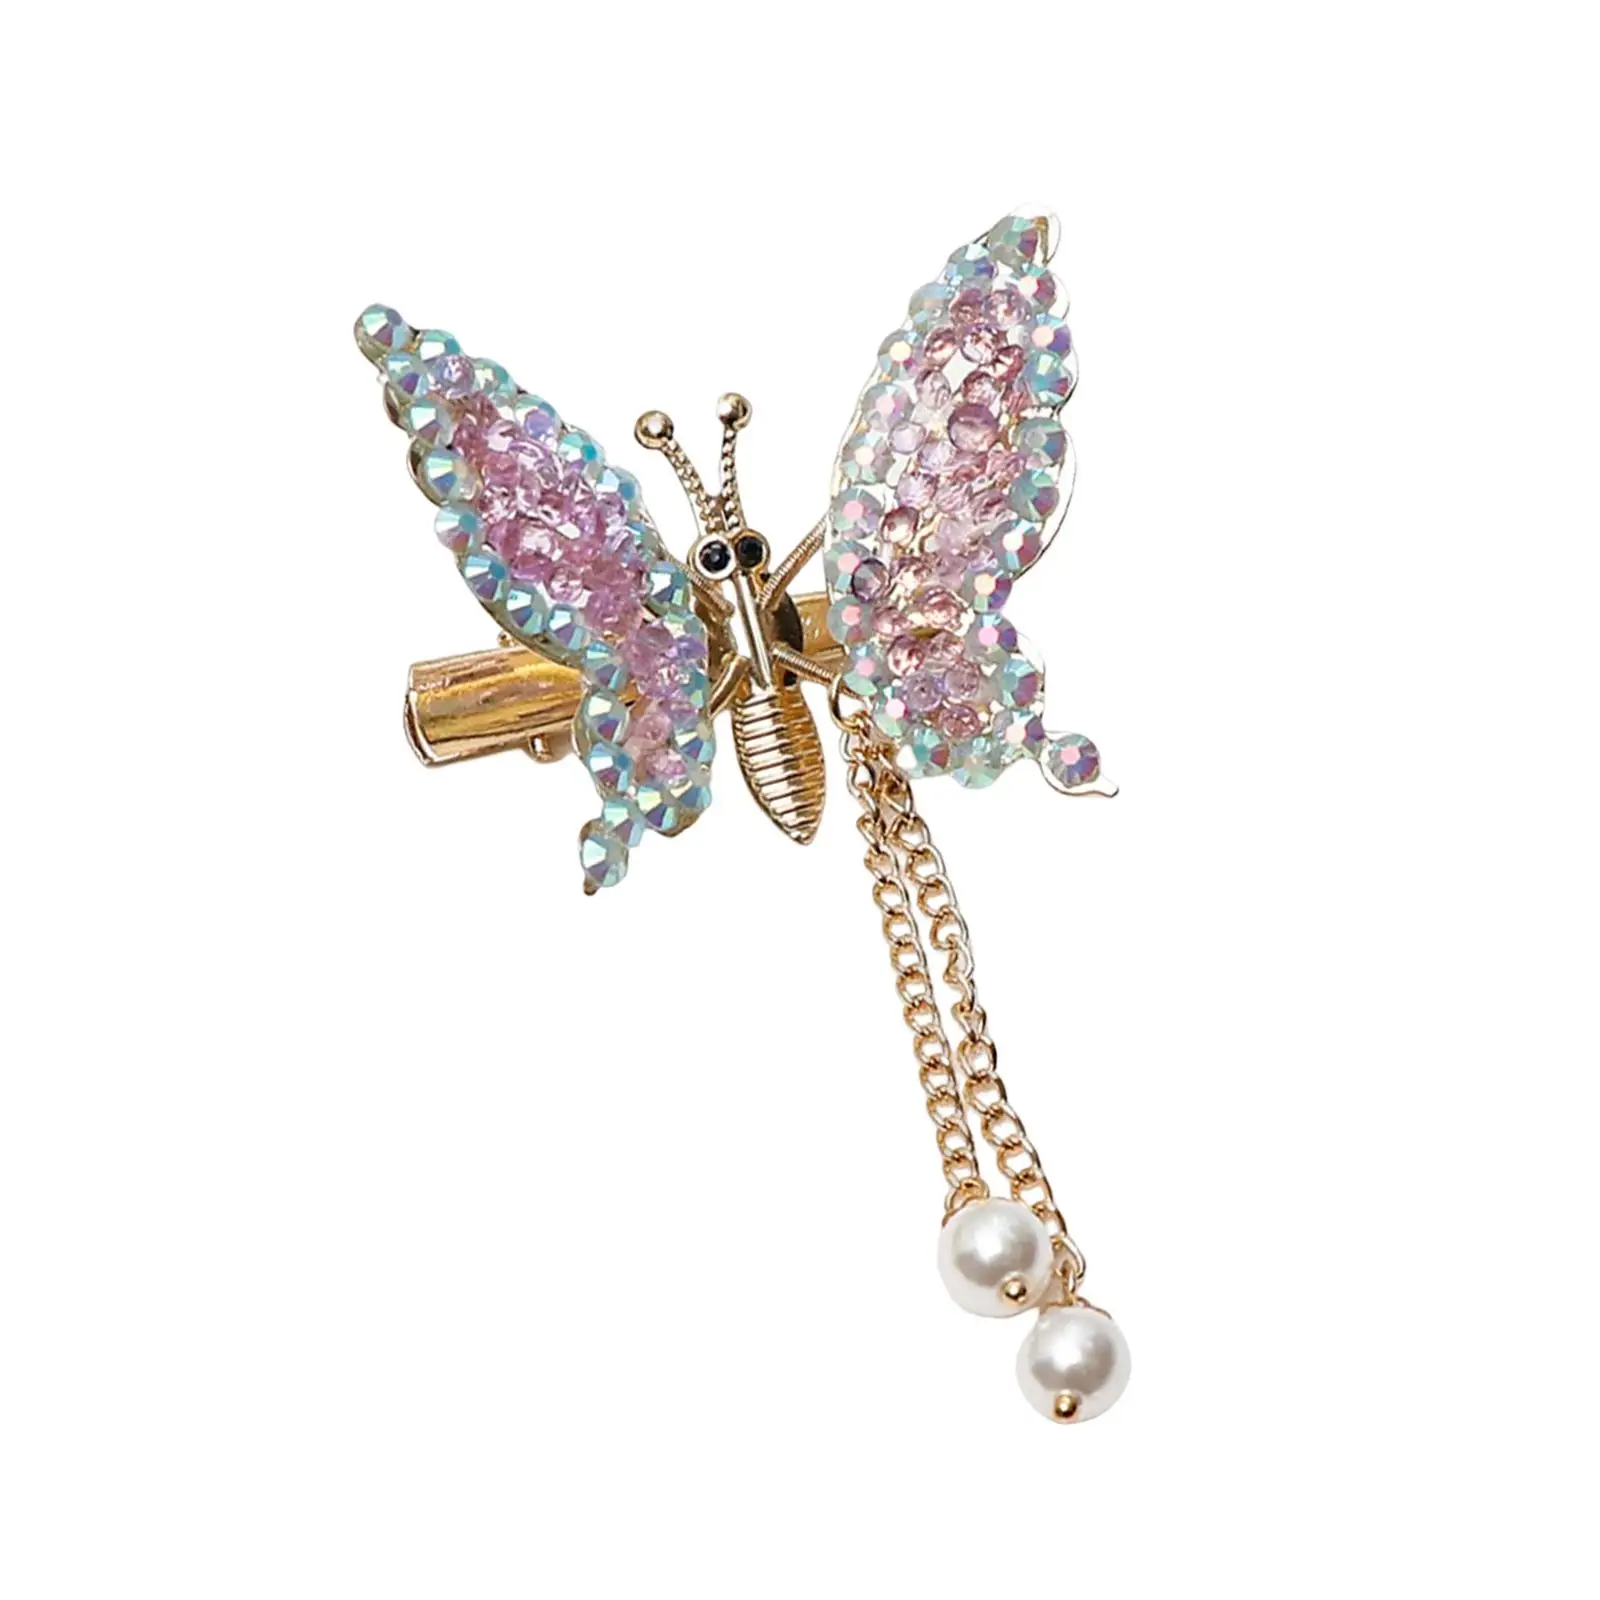 Tassel Butterfly Hair Clips, Barrettes Hair Pin Hanging Ear Butterfly Hair Styling Clip Hair Accessories for Women and Girls